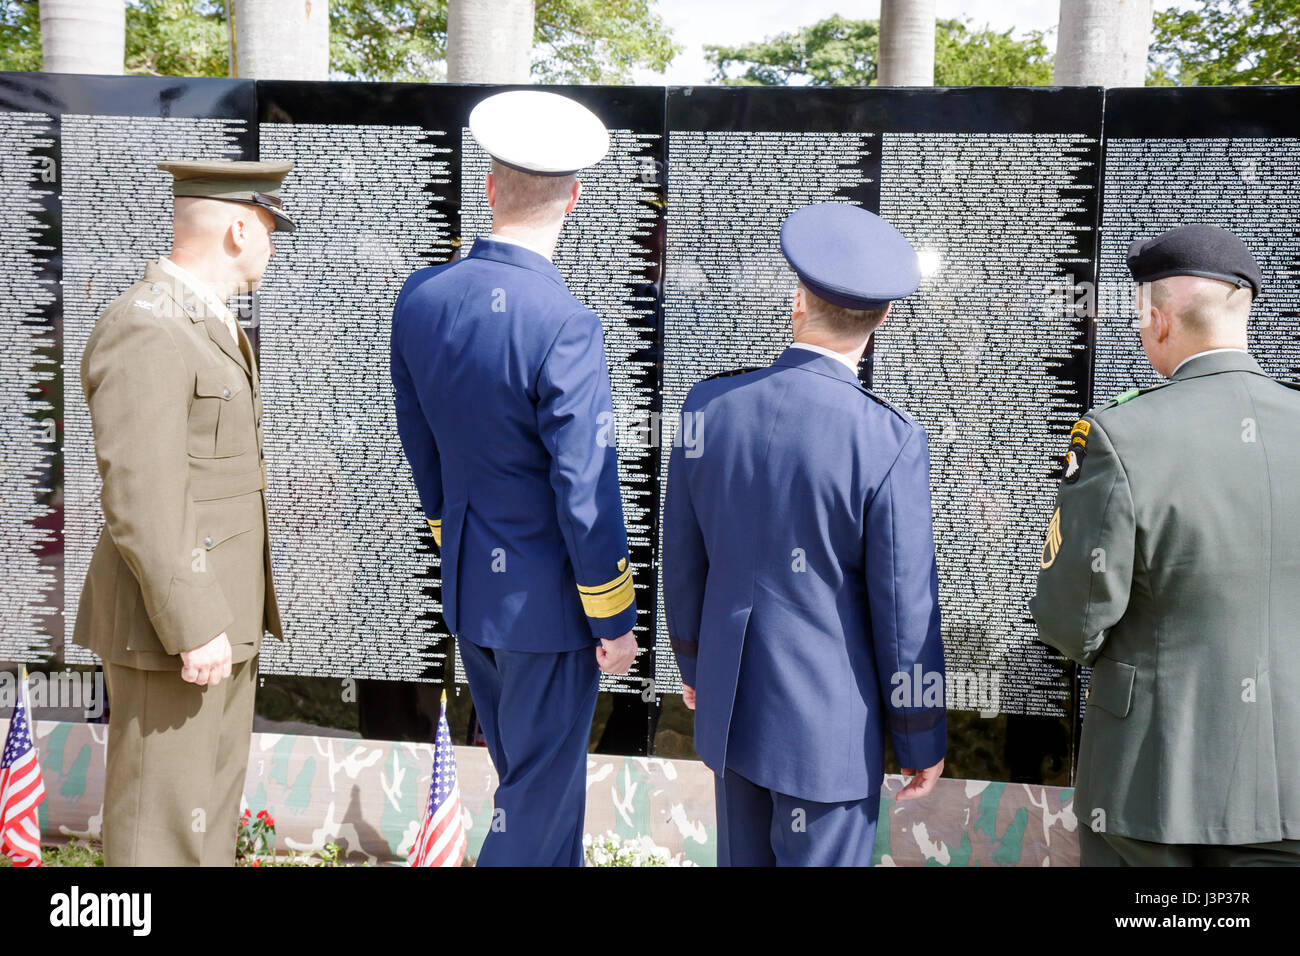 Miami Florida,Bayfront Park,The Moving Wall,Vietnam Veterans Memorial,replica,names,killed in action,opening ceremony,military,war,rank,Army,Airborne, Stock Photo